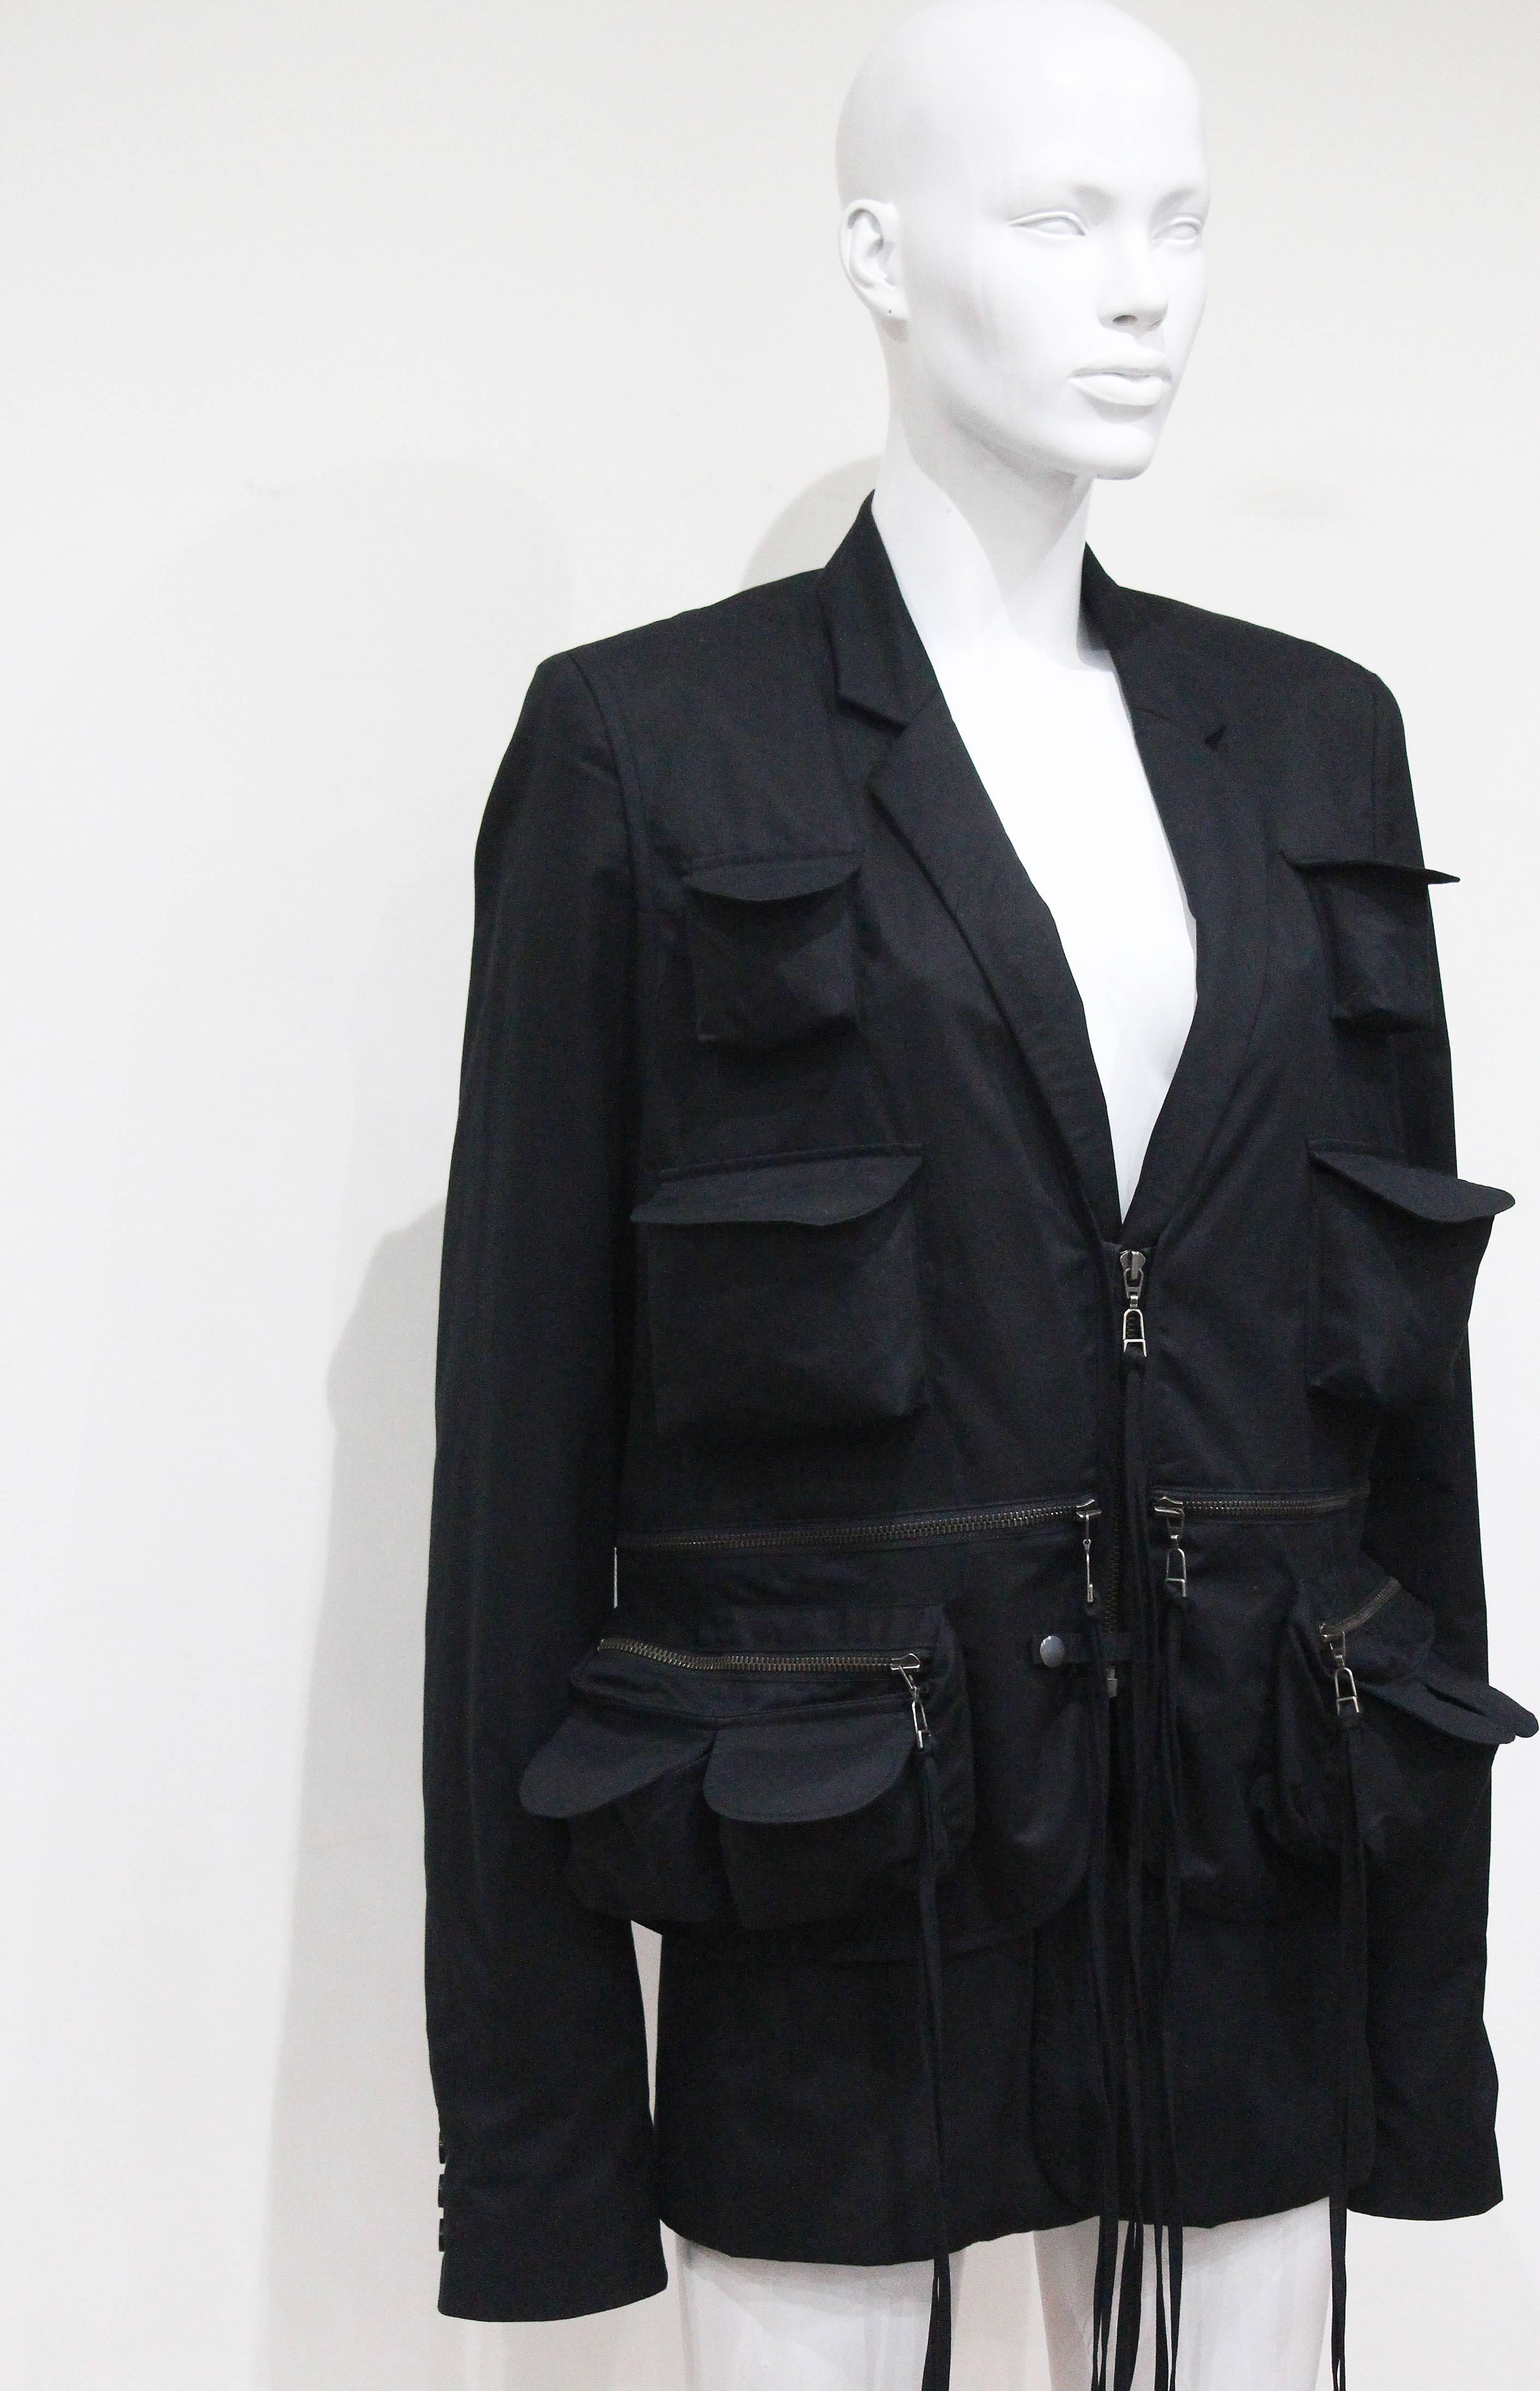 A Raf Simons black military style blazer jacket from the spring/summer 2003 'Consumed' collection. The blazer jacket of black cotton has an attached military waistcoat with multiple pockets with extra long tasseled zippers. 

Mens Size 50 